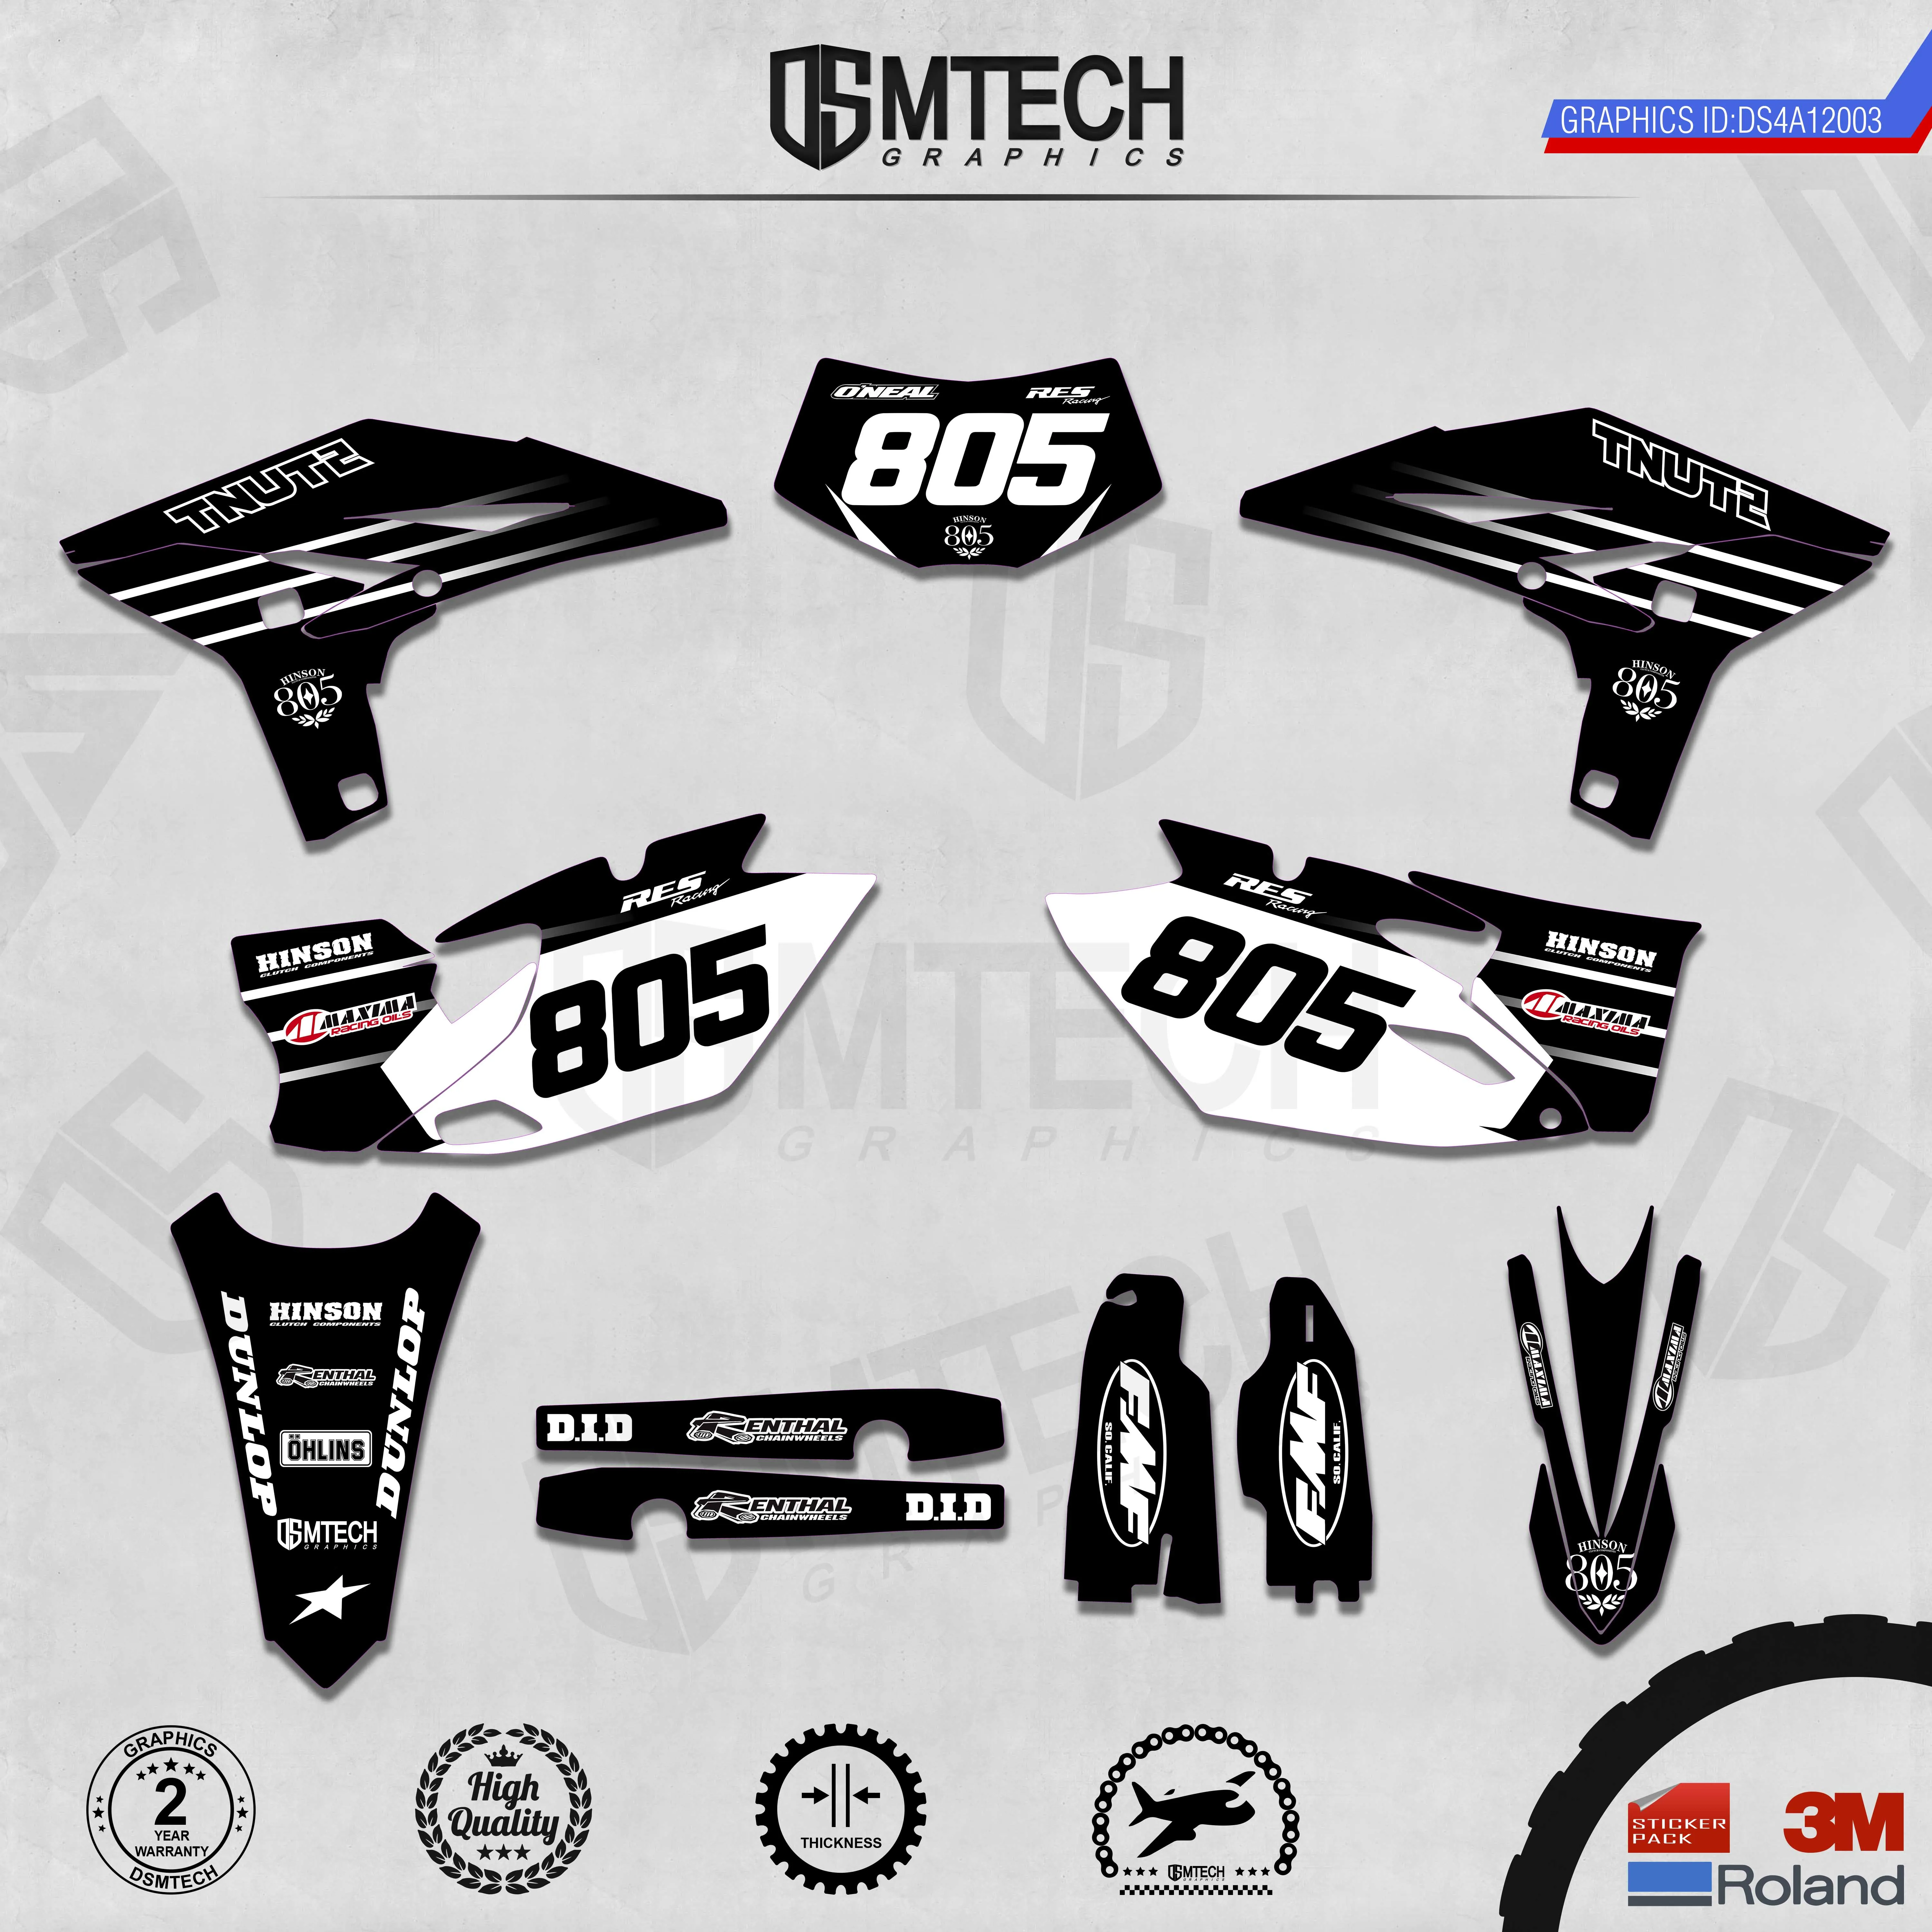 dsmtech-customized-team-graphics-backgrounds-decals-3m-custom-stickers-for-wrf450-two-stroke-2012-2015-003